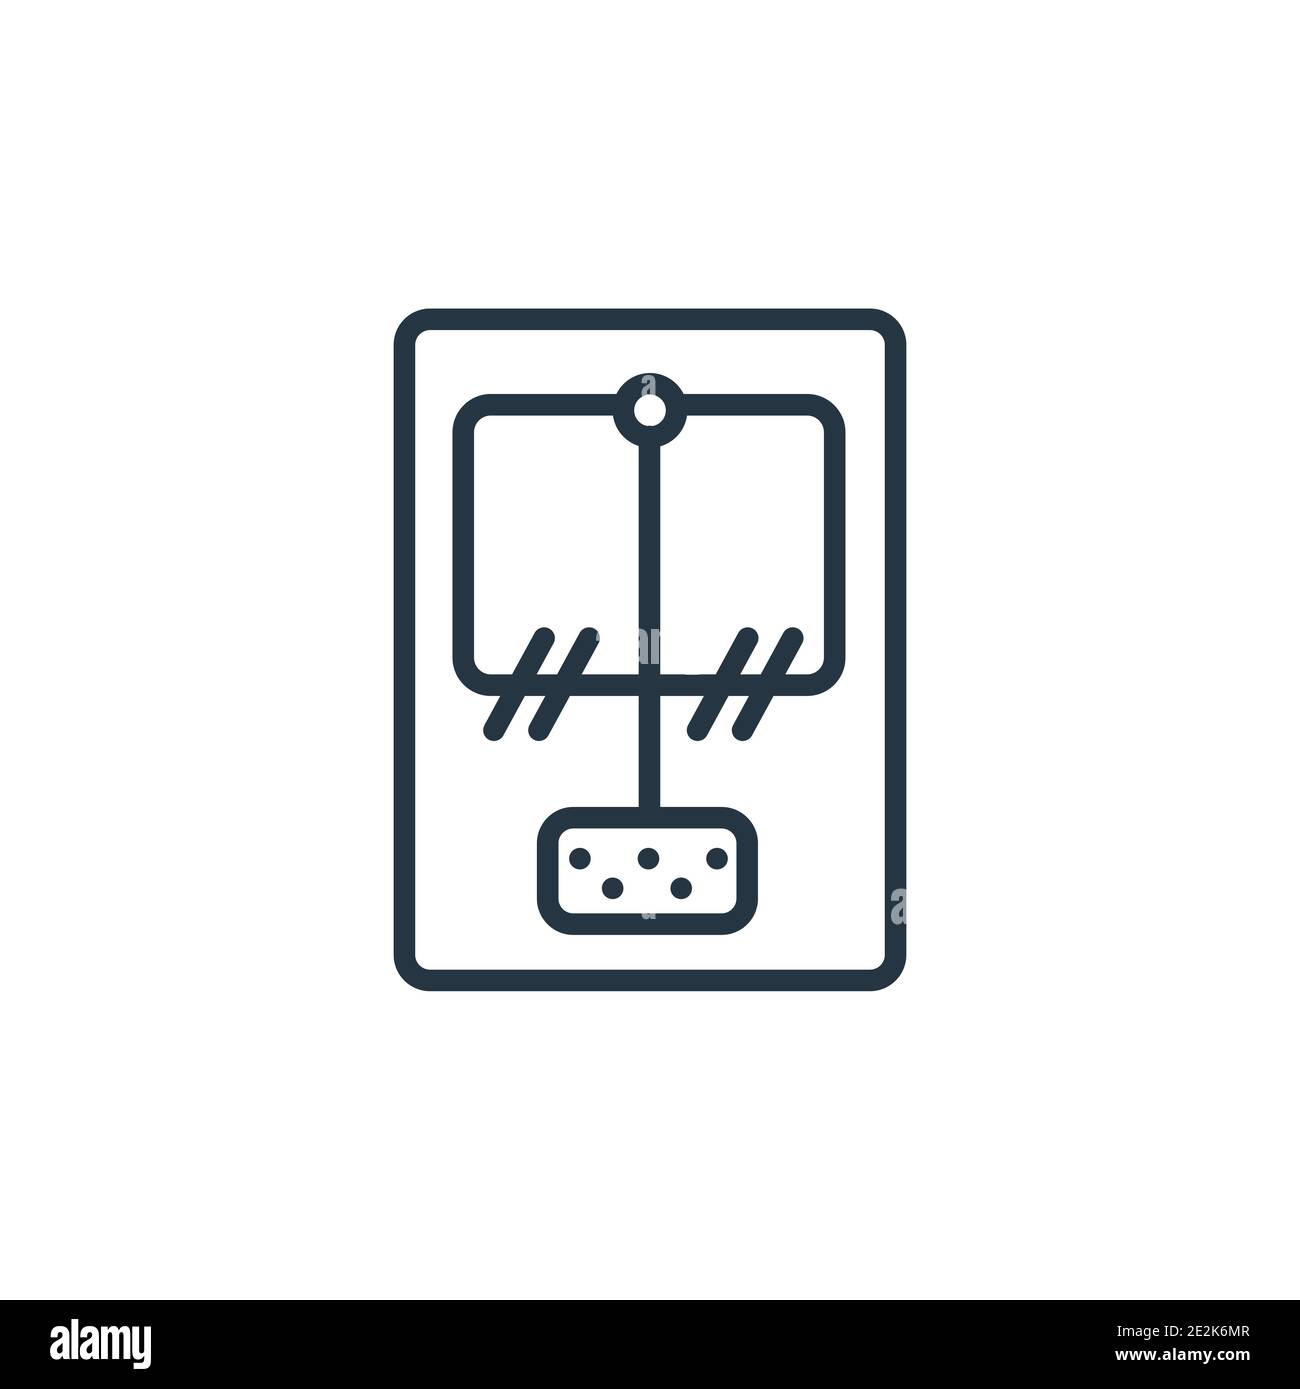 https://c8.alamy.com/comp/2E2K6MR/mousetrap-outline-vector-icon-thin-line-black-mousetrap-icon-flat-vector-simple-element-illustration-from-editable-electronic-devices-concept-isolat-2E2K6MR.jpg